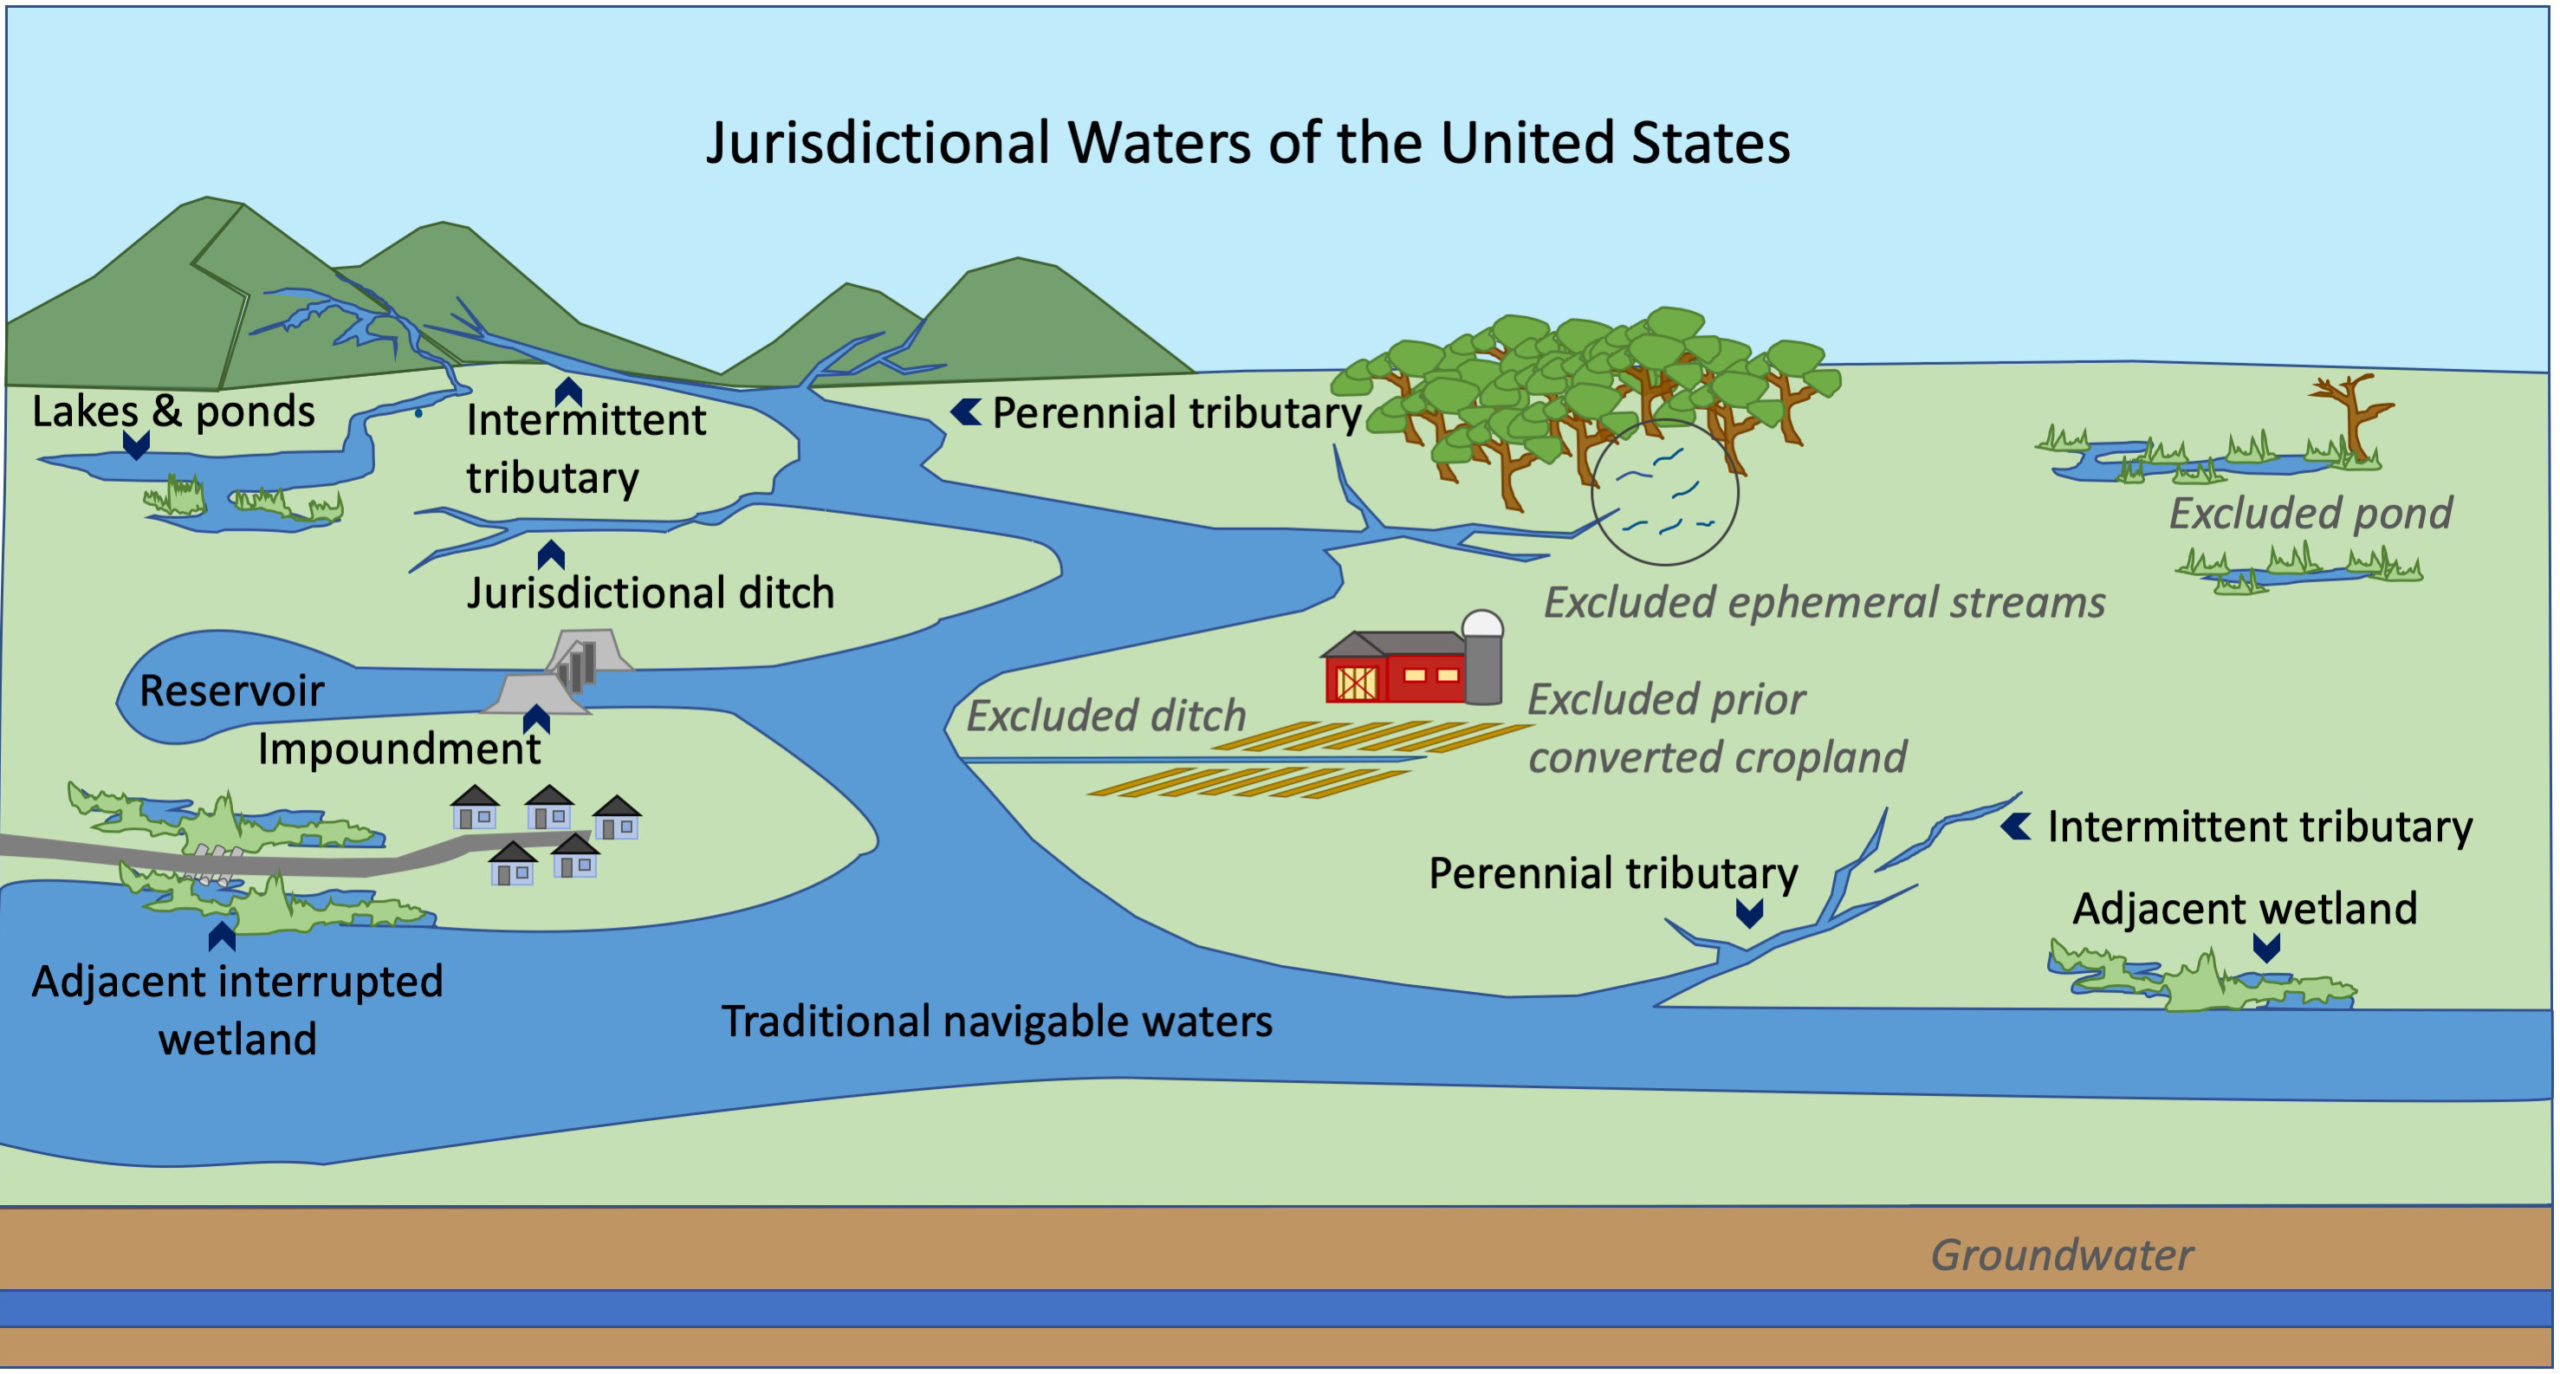 Illustration identifying specific navigable waters the federal government has jurisdiction over.